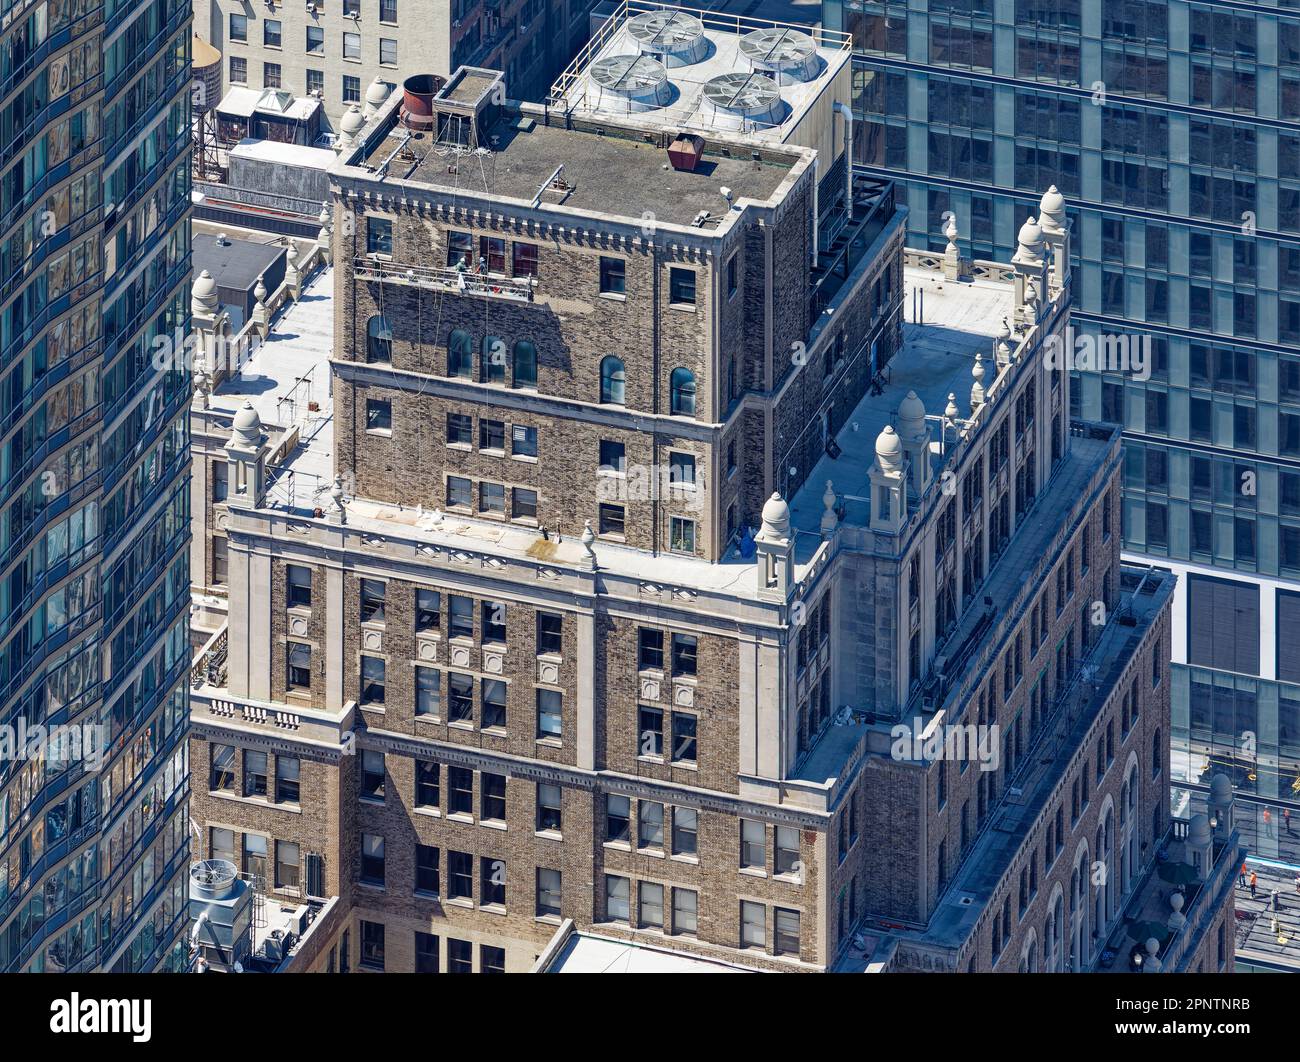 On high, classical stone details endure even as PENN 11 owners modernize the century-old Equitable Life Assurance Building in NYC’s Garment District. Stock Photo